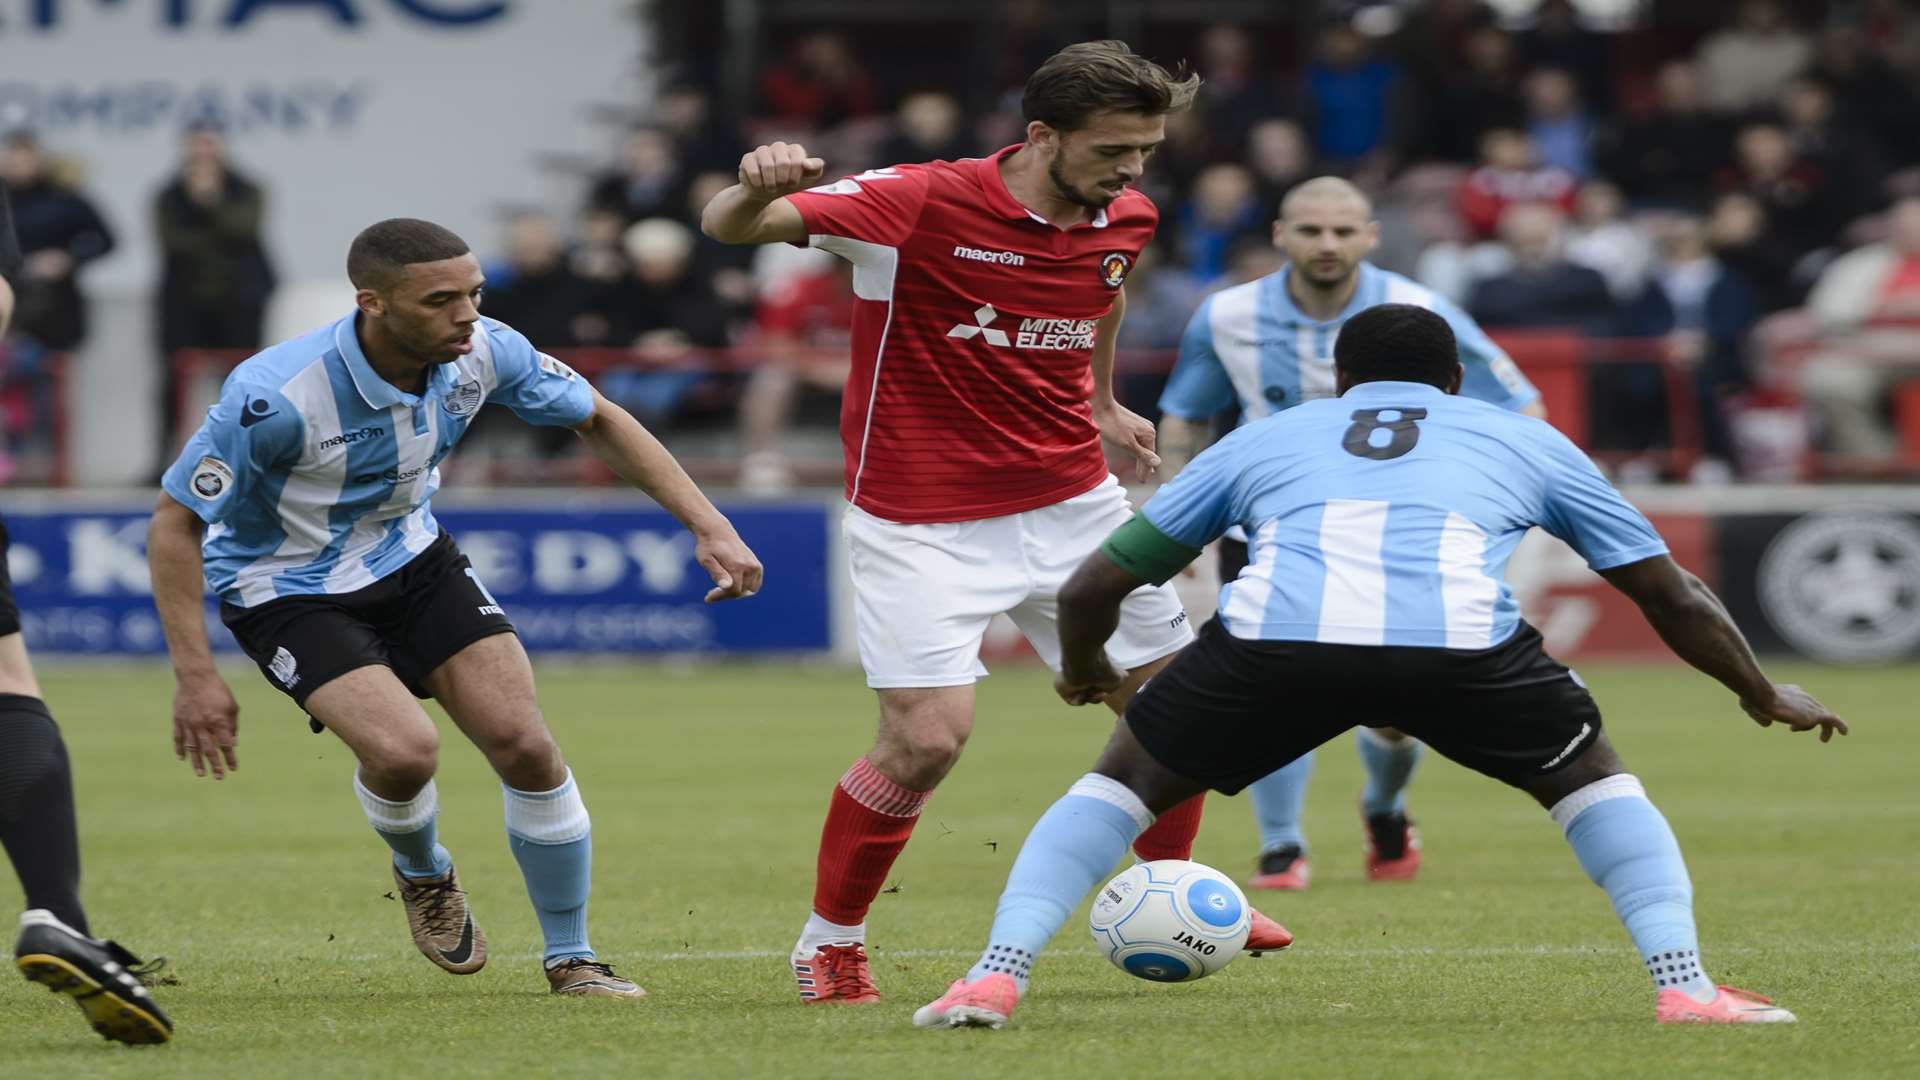 Jack Powell takes on two Hampton players during Ebbsfleet's play-off semi-final Picture: Andy payton